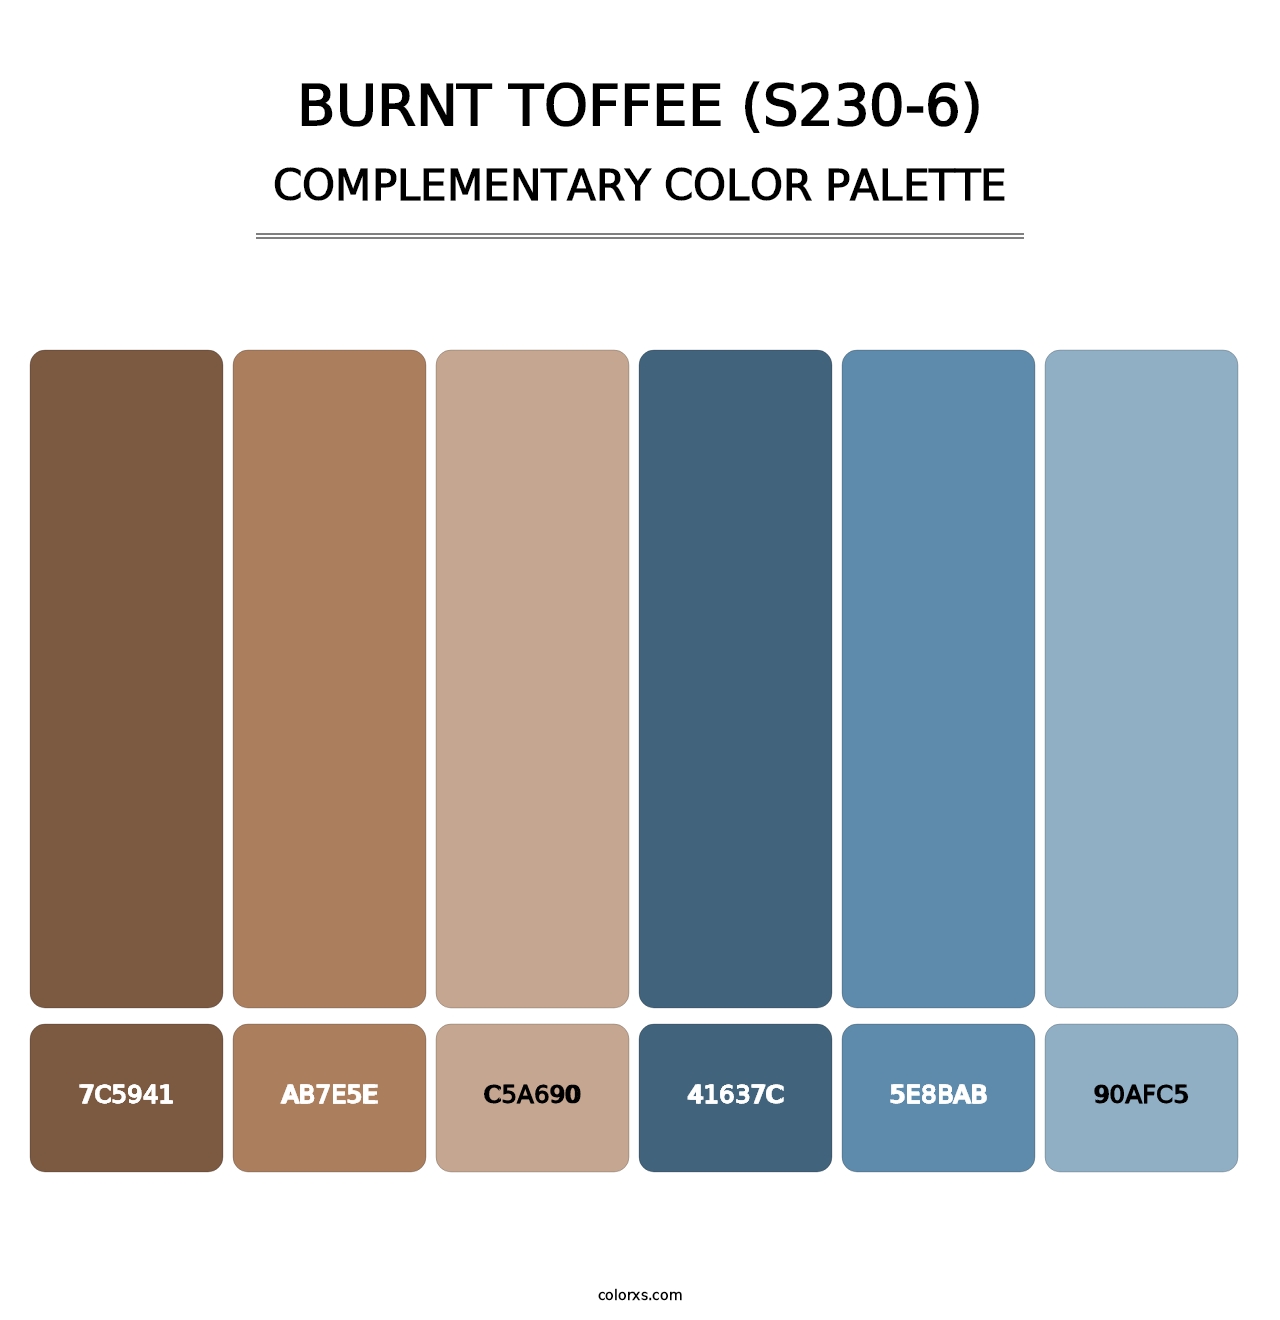 Burnt Toffee (S230-6) - Complementary Color Palette